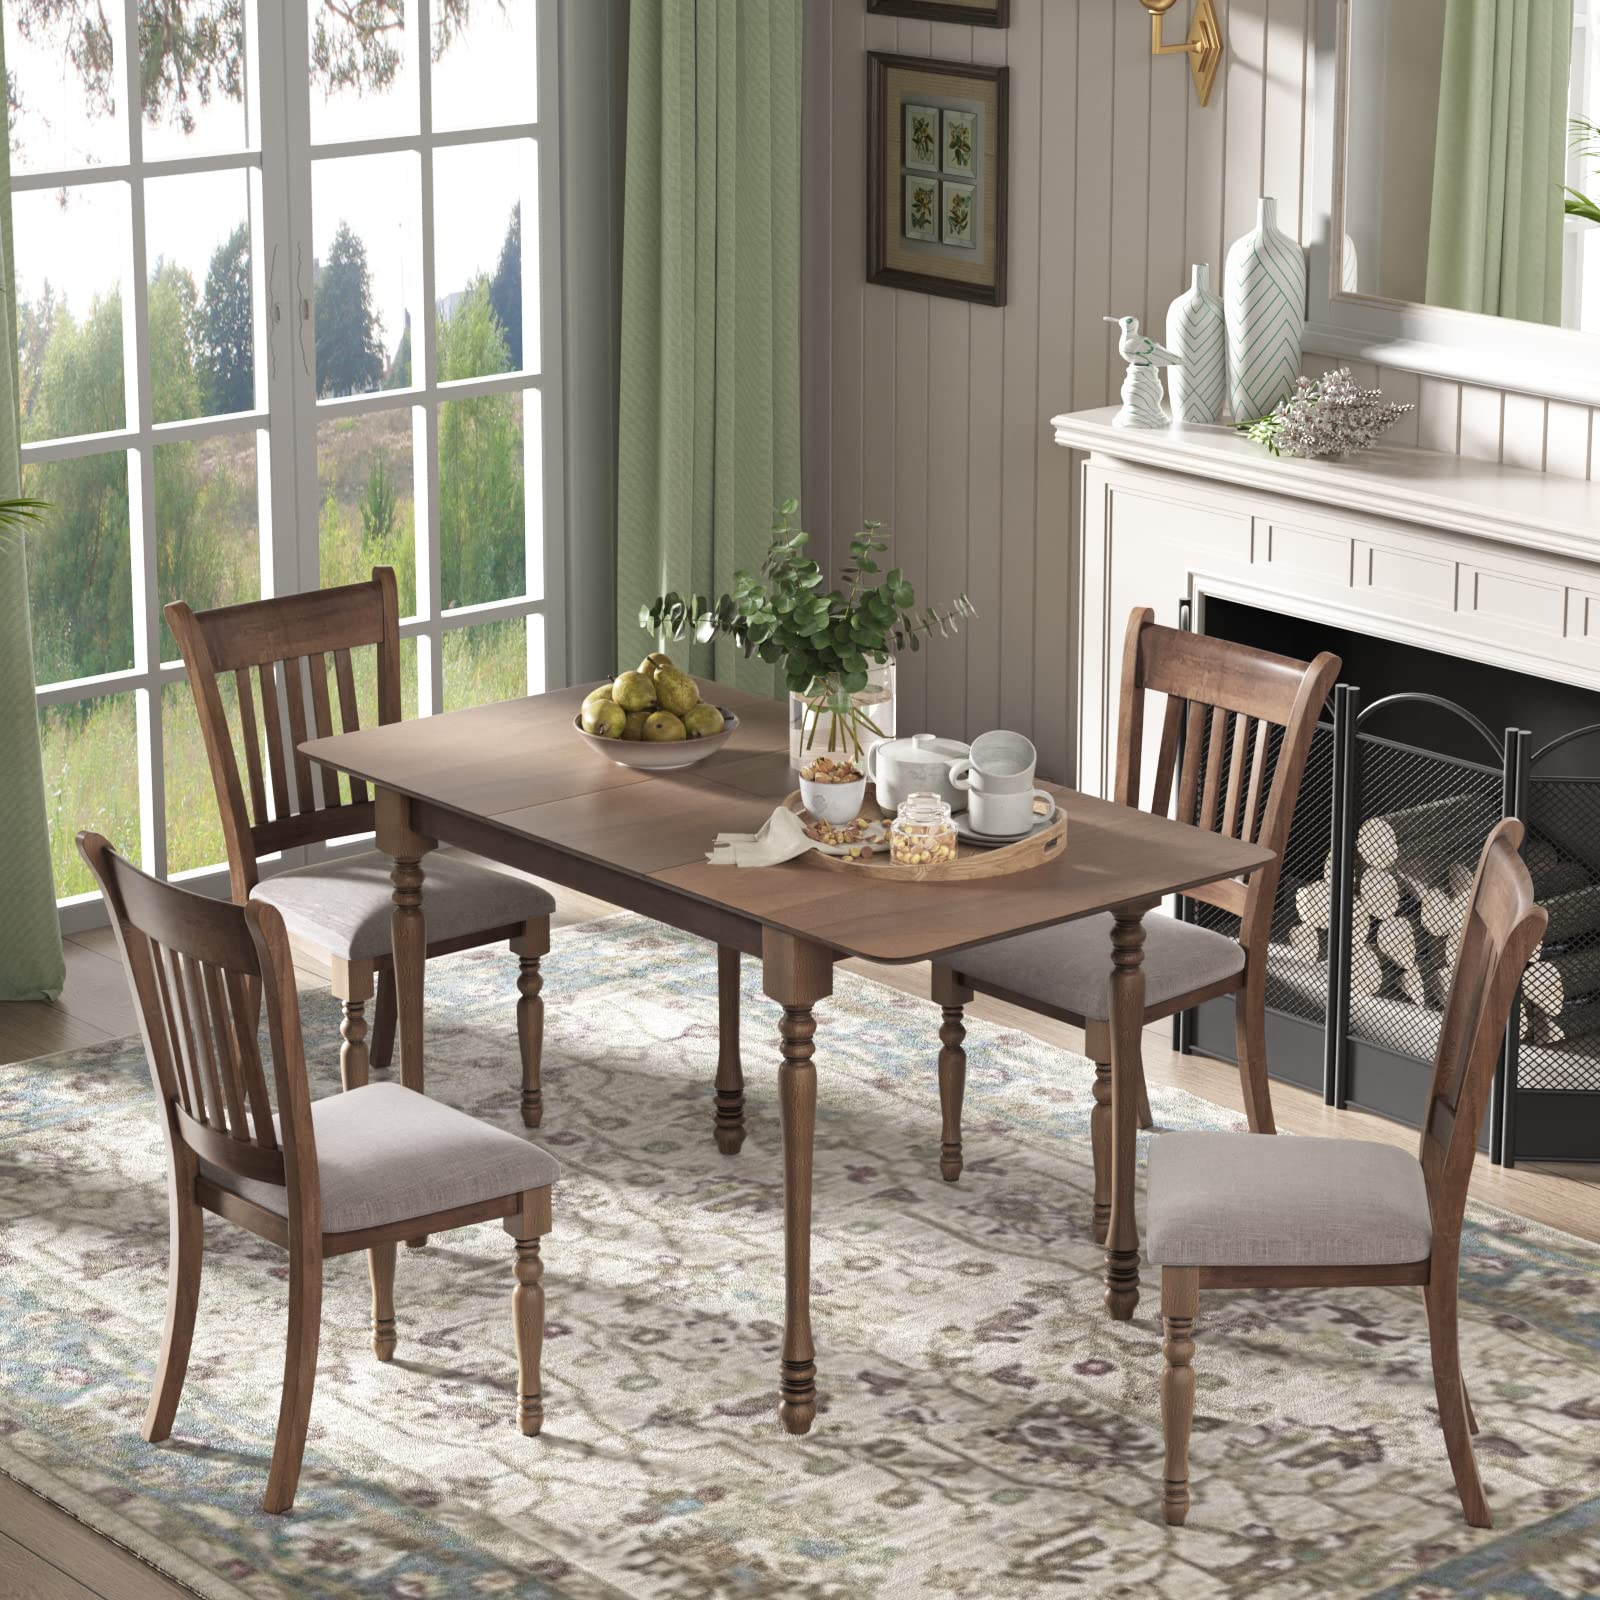 Giantex 5-Piece Dining Table Set, Solid Rubber Wood Farmhouse Kitchen Table Set